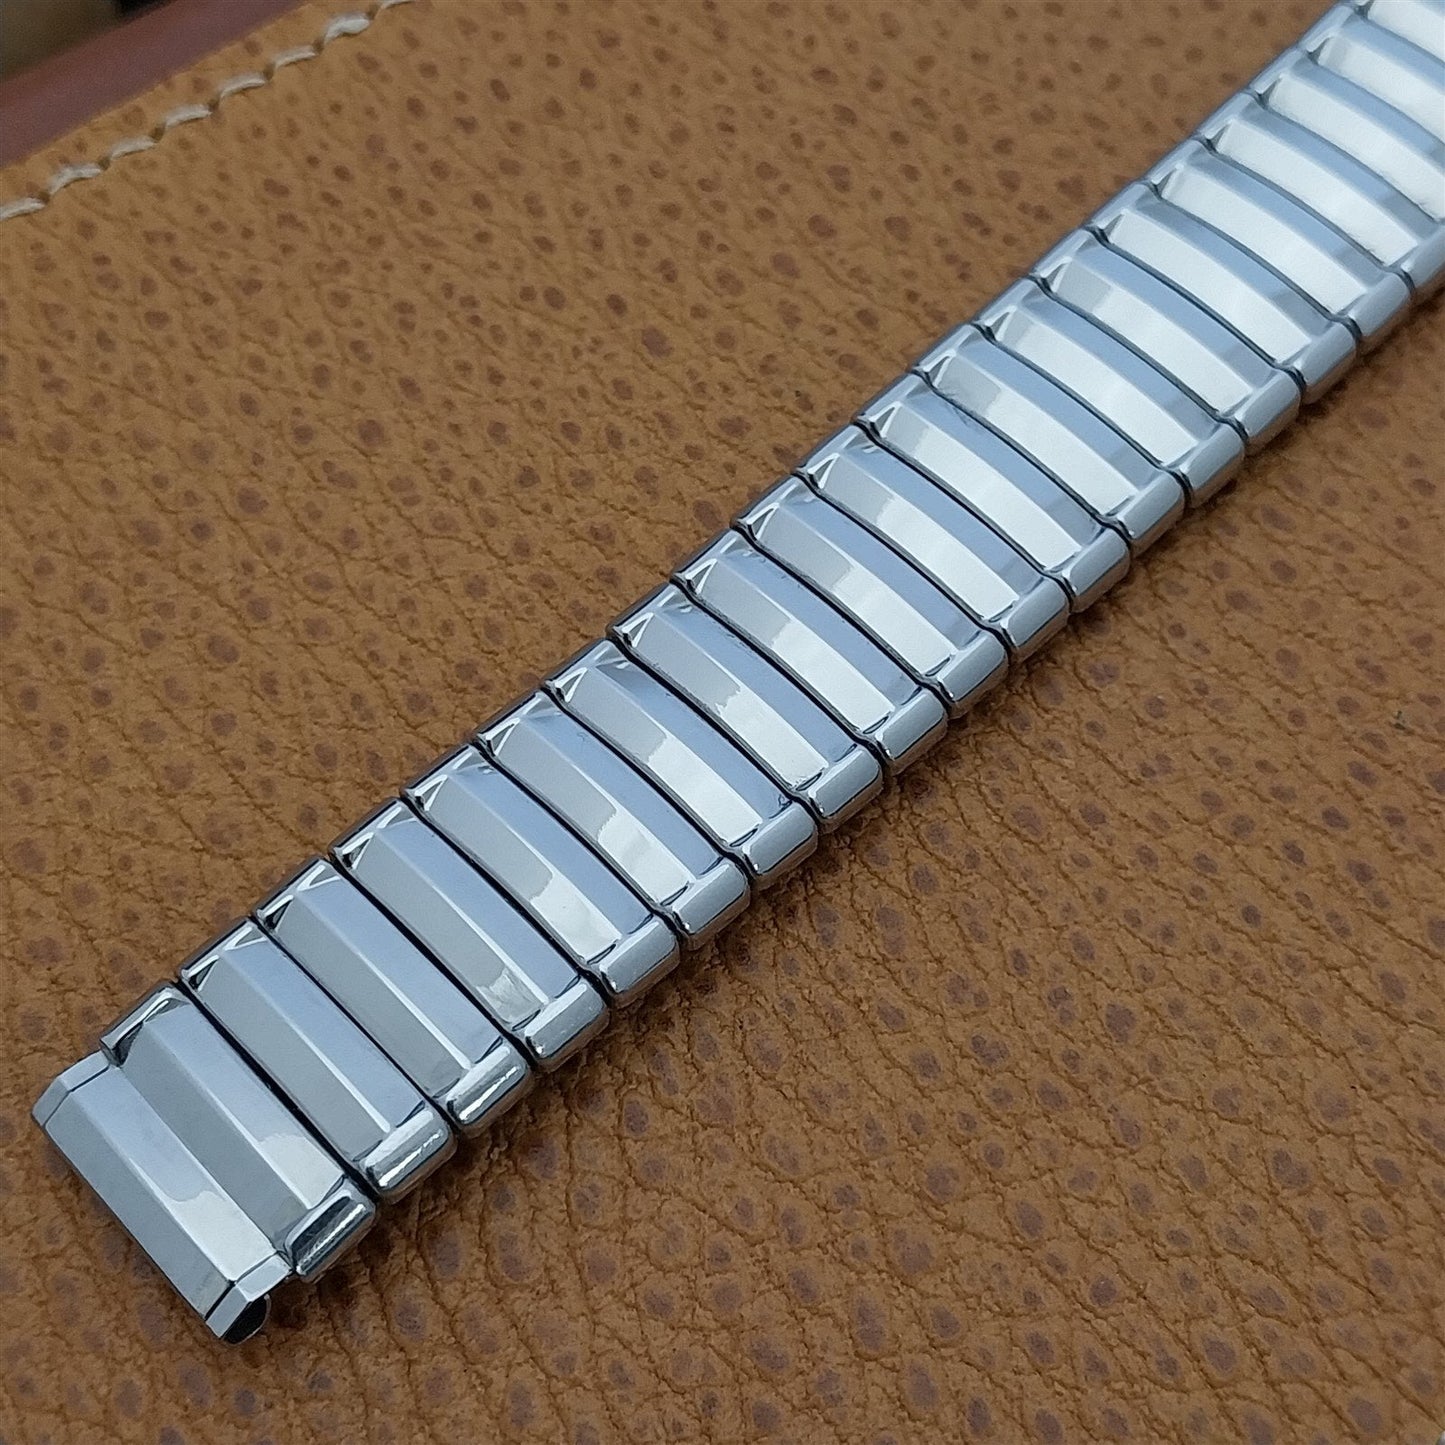 1950s 5/8" 16mm JB Champion USA Stainless Steel Old-Stock Vintage Watch Band